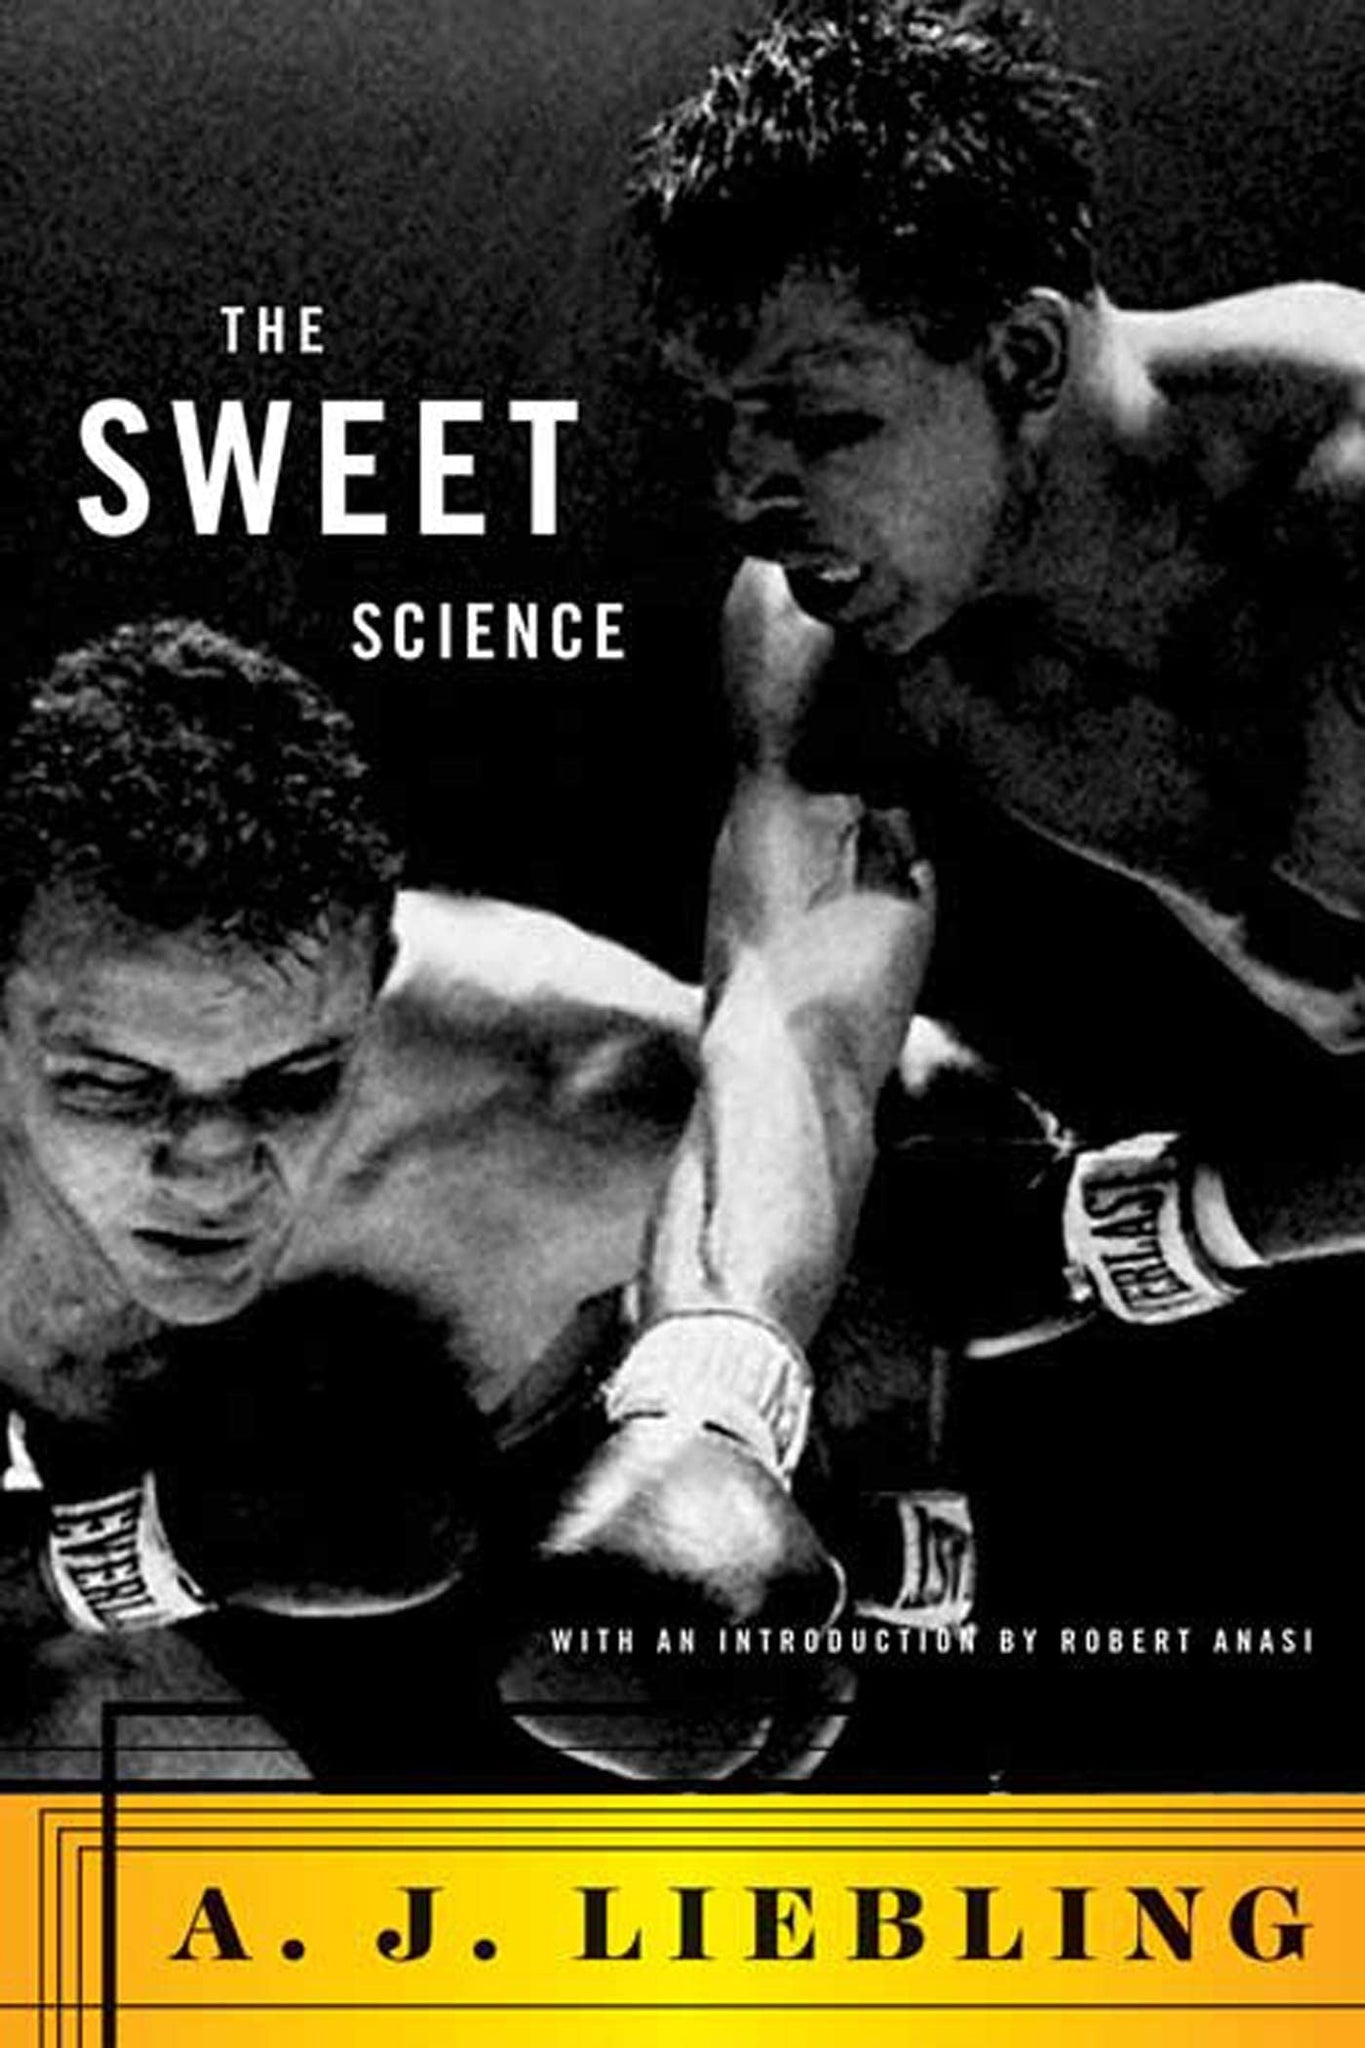 The Sweet Science by A. J. Liebling